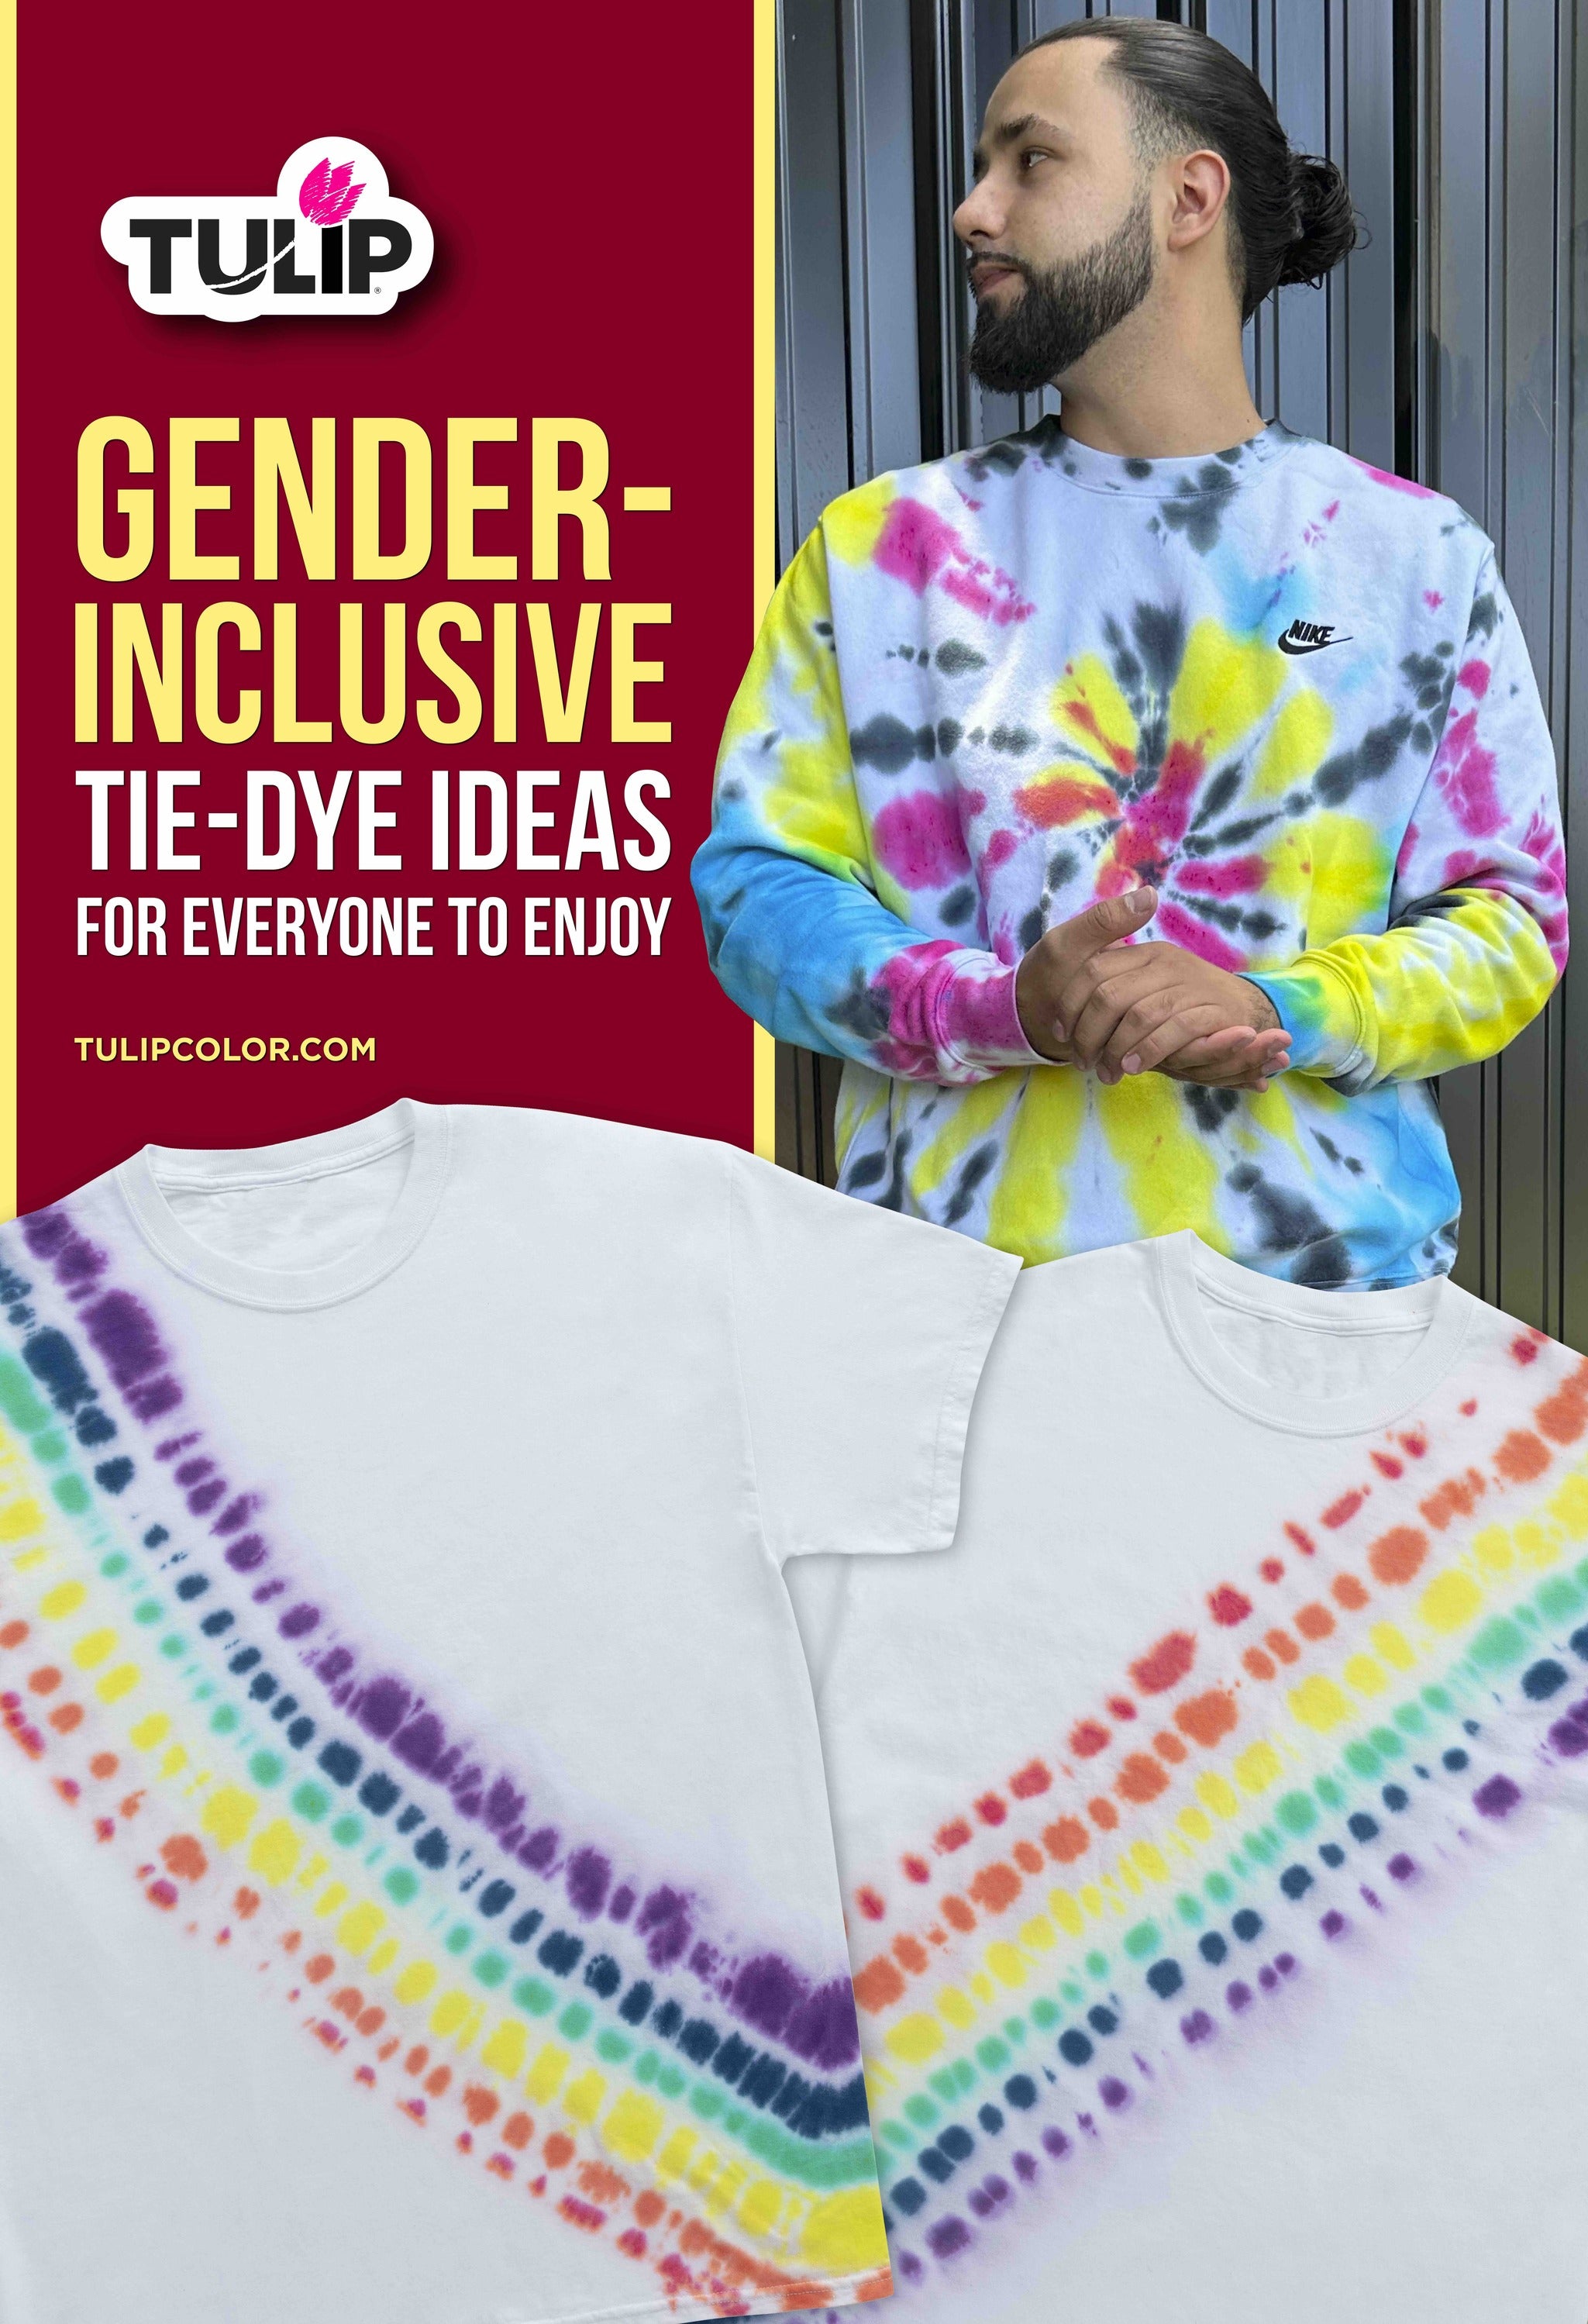 10 Gender-Inclusive Tie-Dye Ideas for Everyone to Enjoy